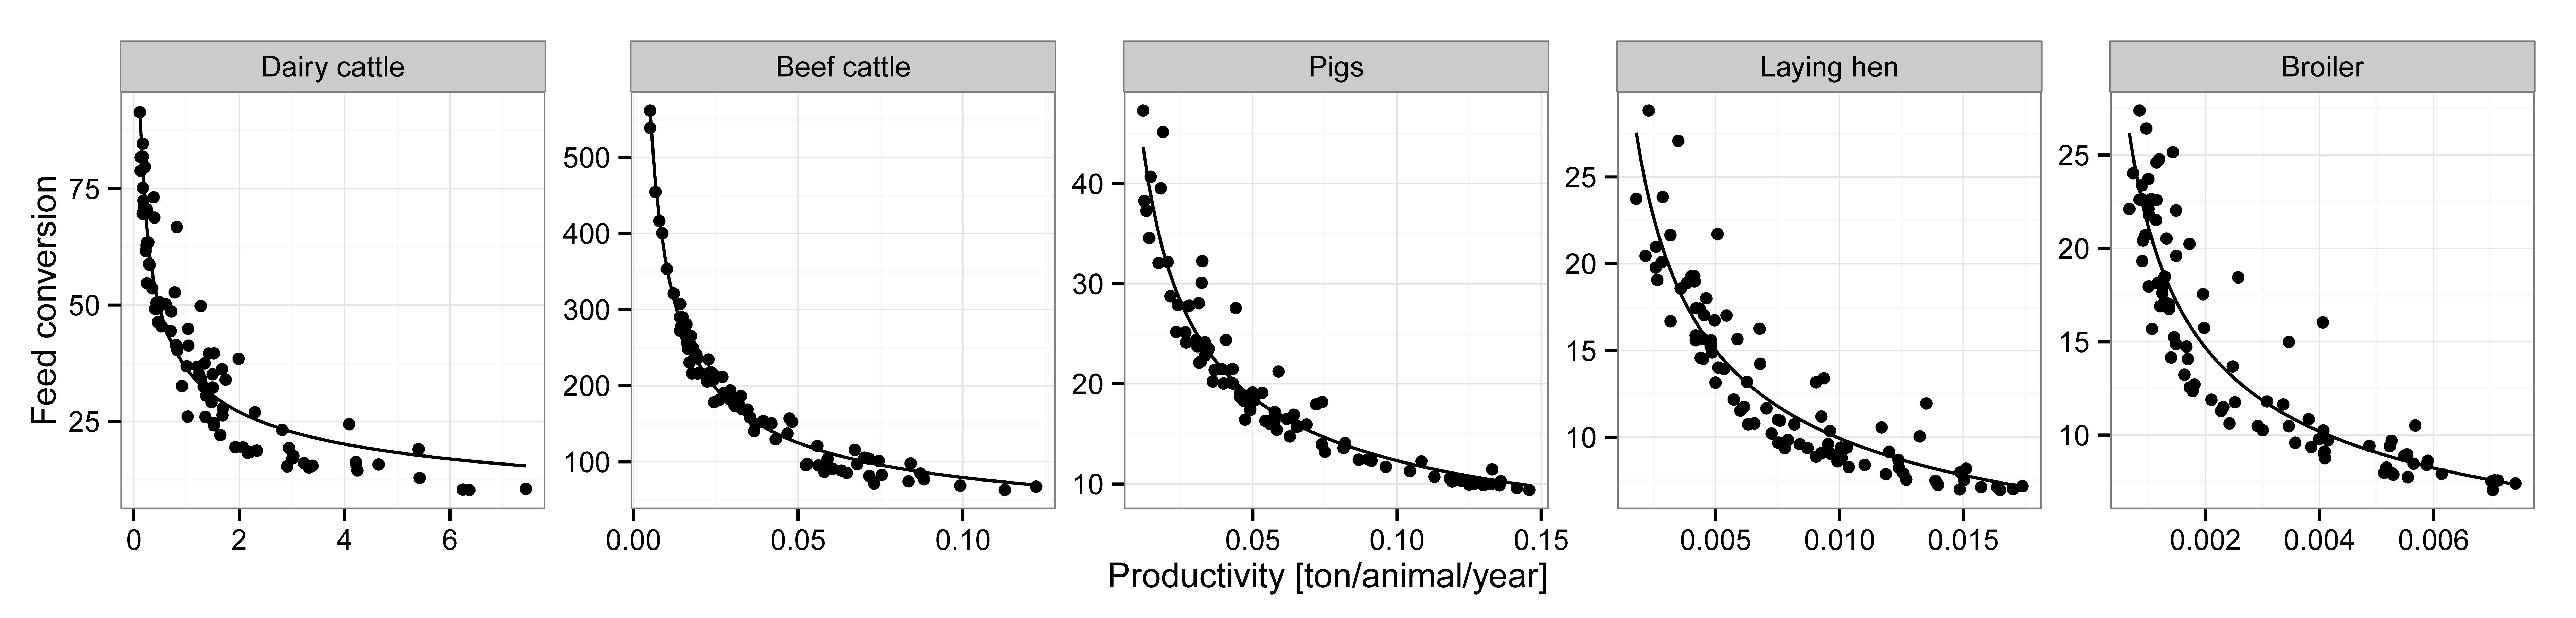 Relationship between feed conversion and livestock productivity (Weindl, Bodirsky, et al. 2017).